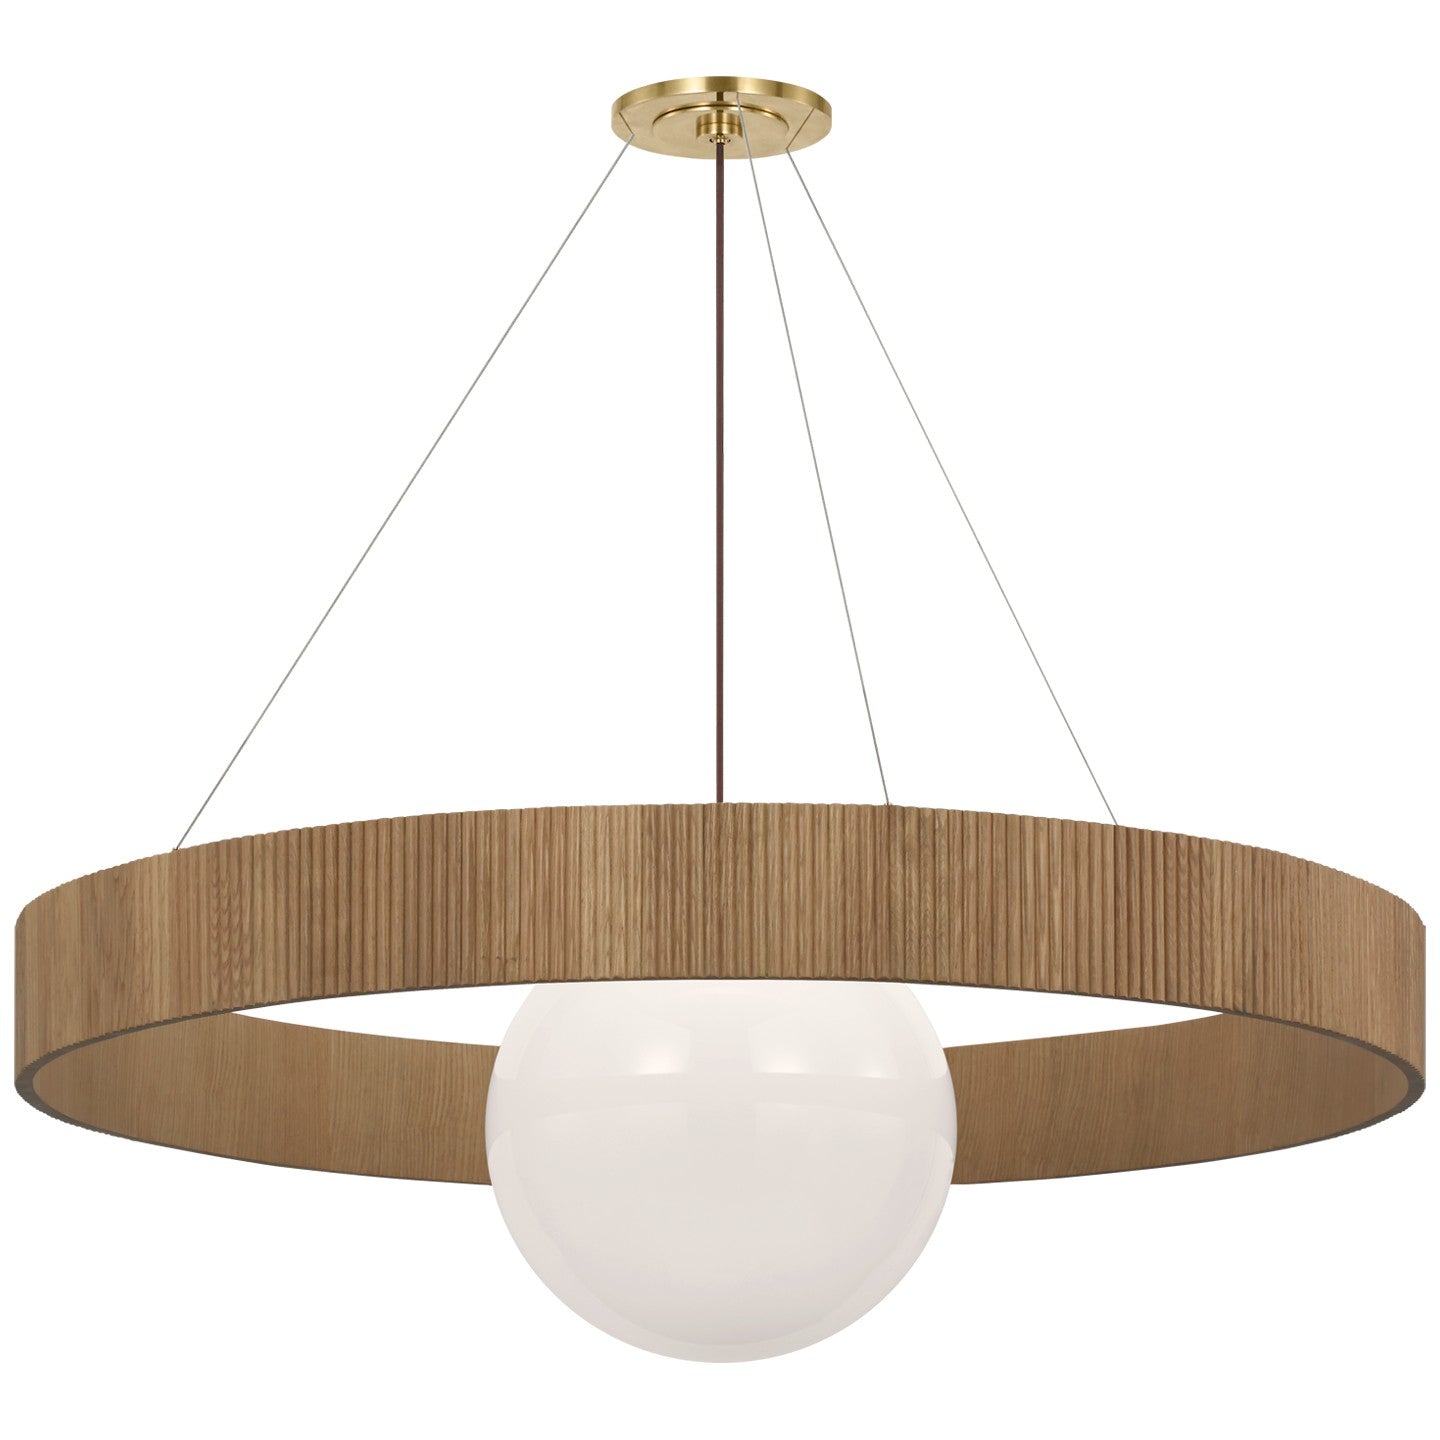 Visual Comfort Signature - WS 5002HAB/NO-WG - LED Chandelier - Arena - Hand-Rubbed Antique Brass and White Glass